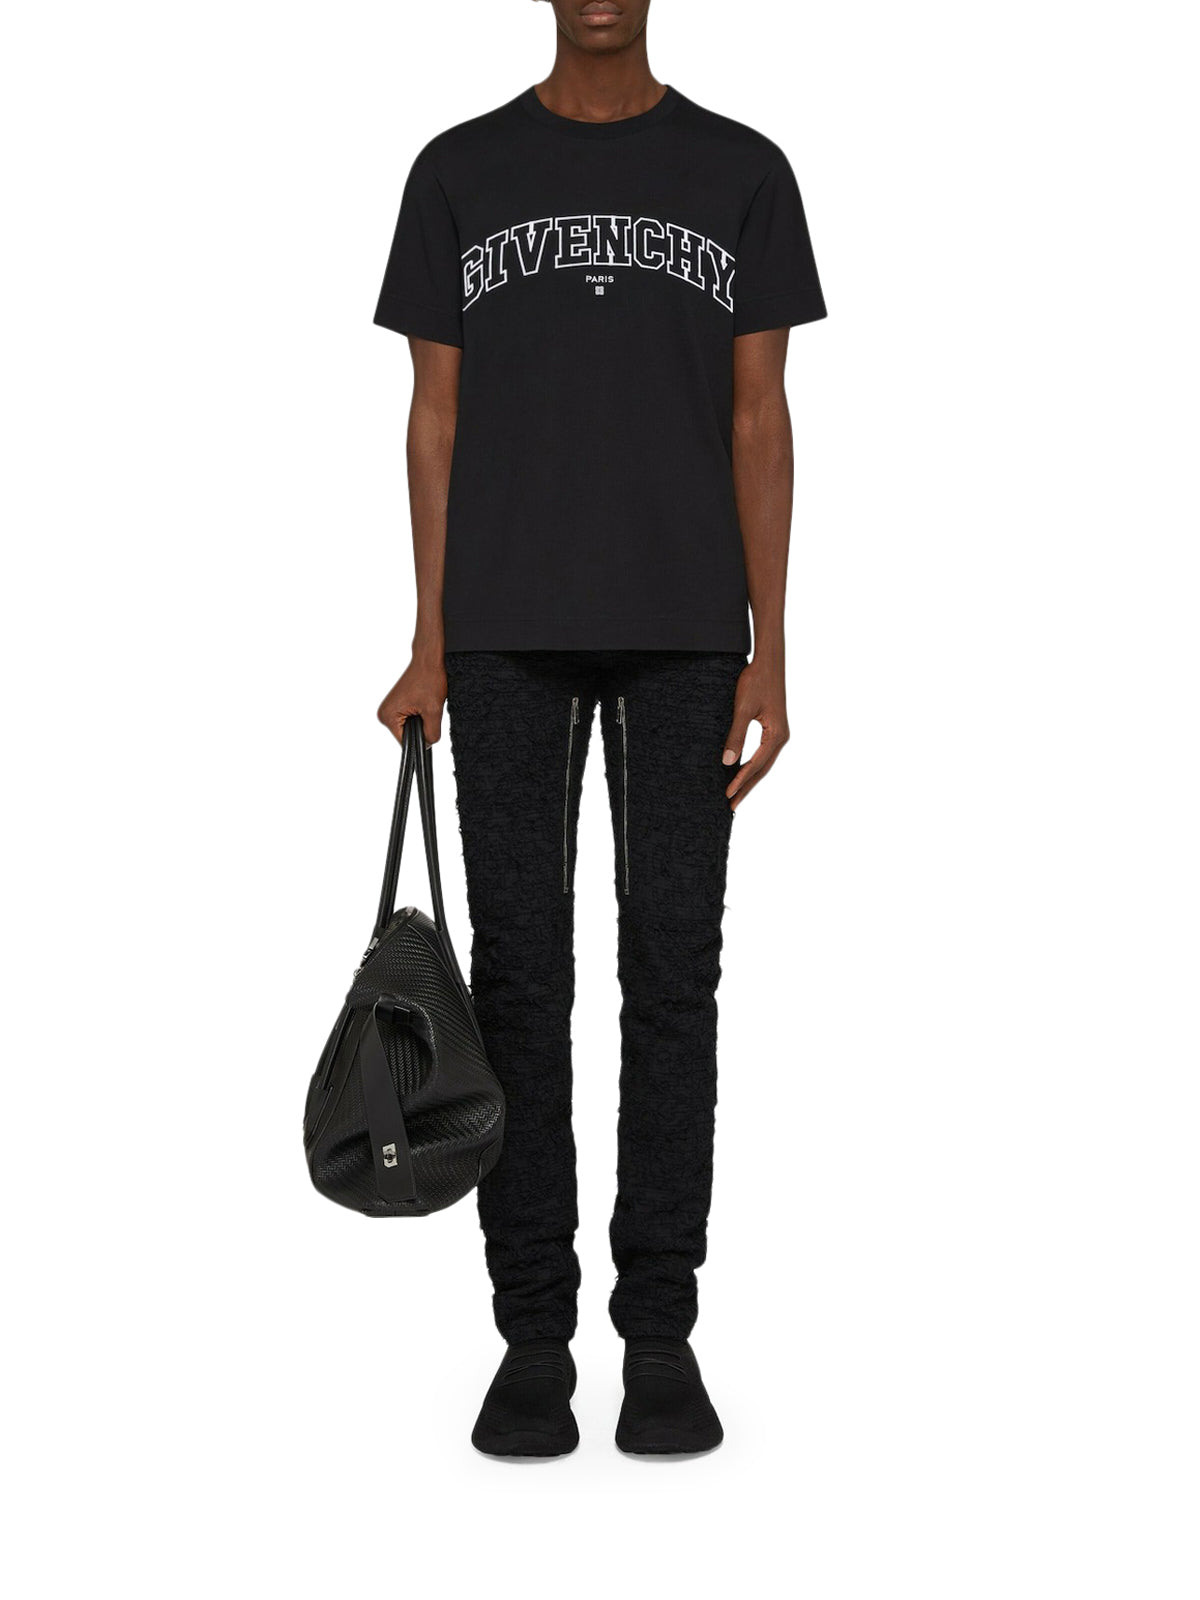 T-shirt in GIVENCHY College embroidered jersey